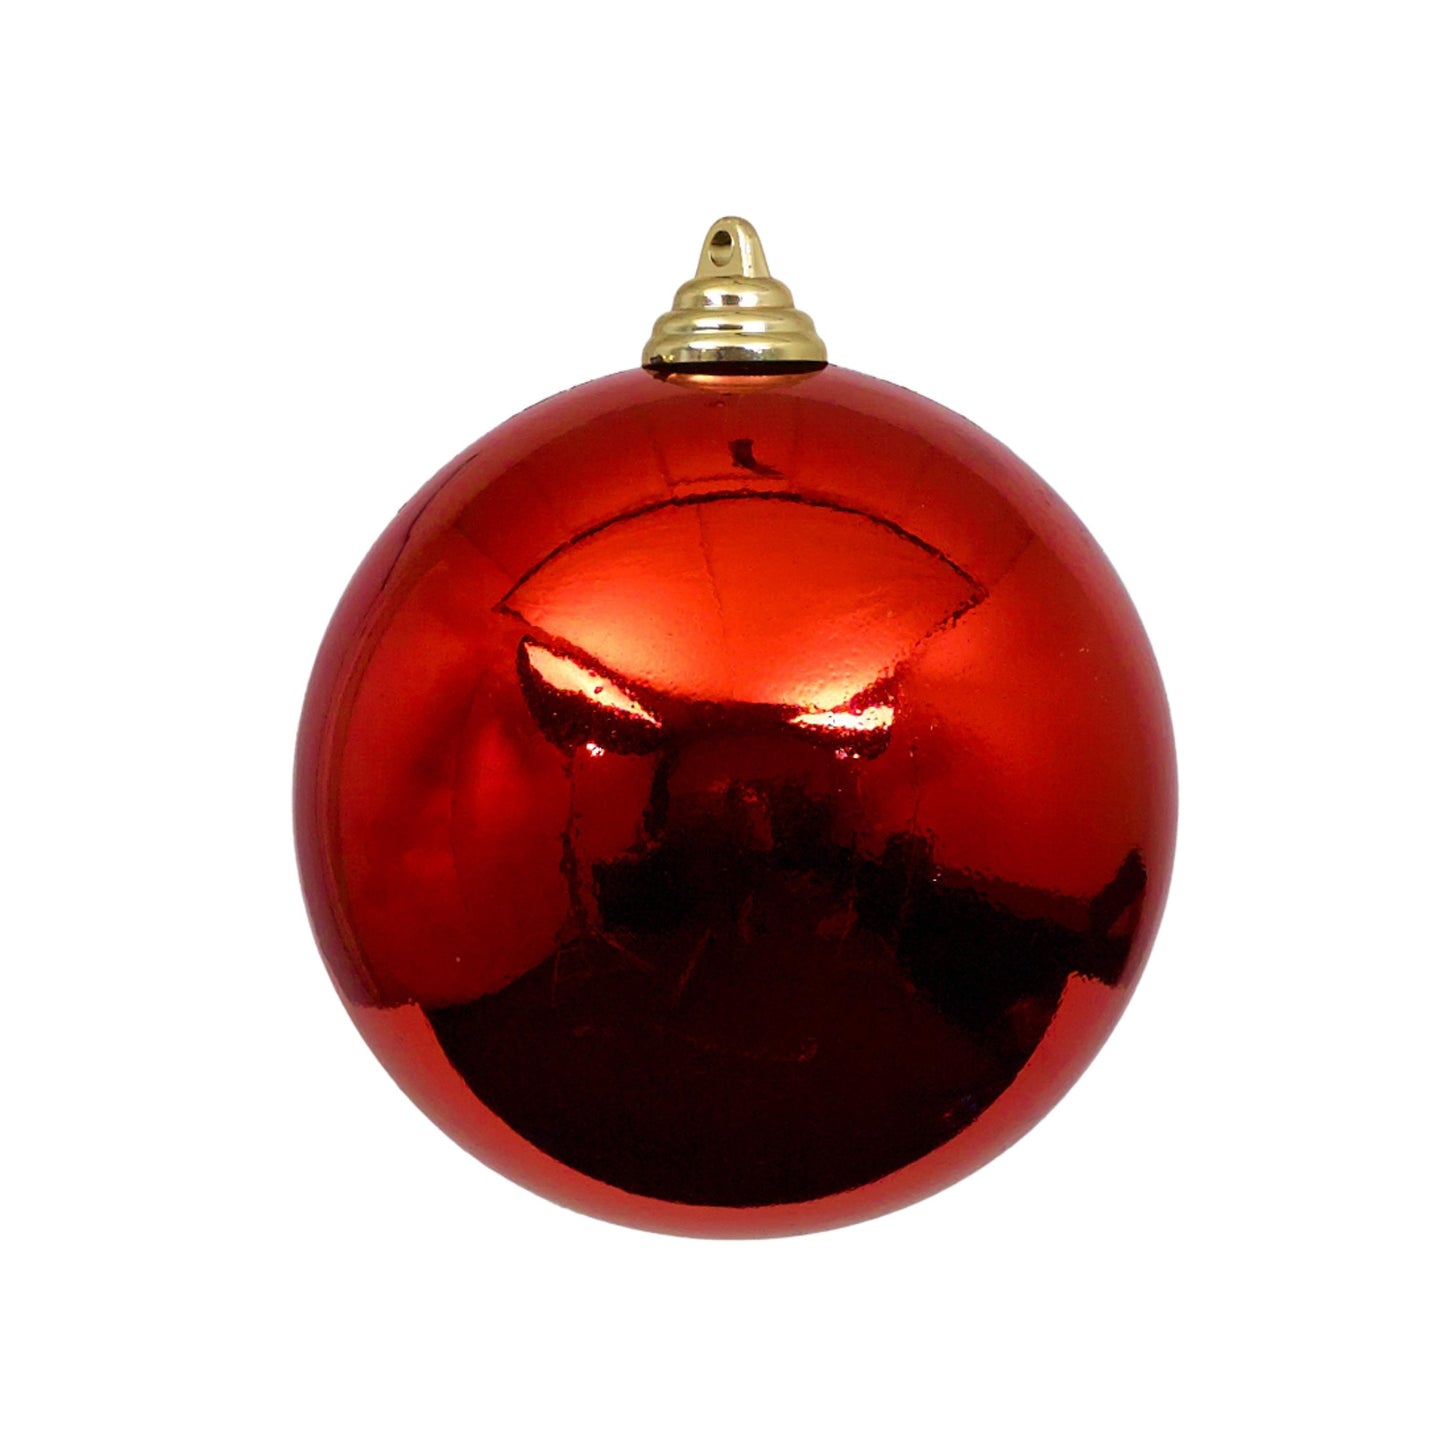 Red Shiny Ornament 5" - Pack of 12